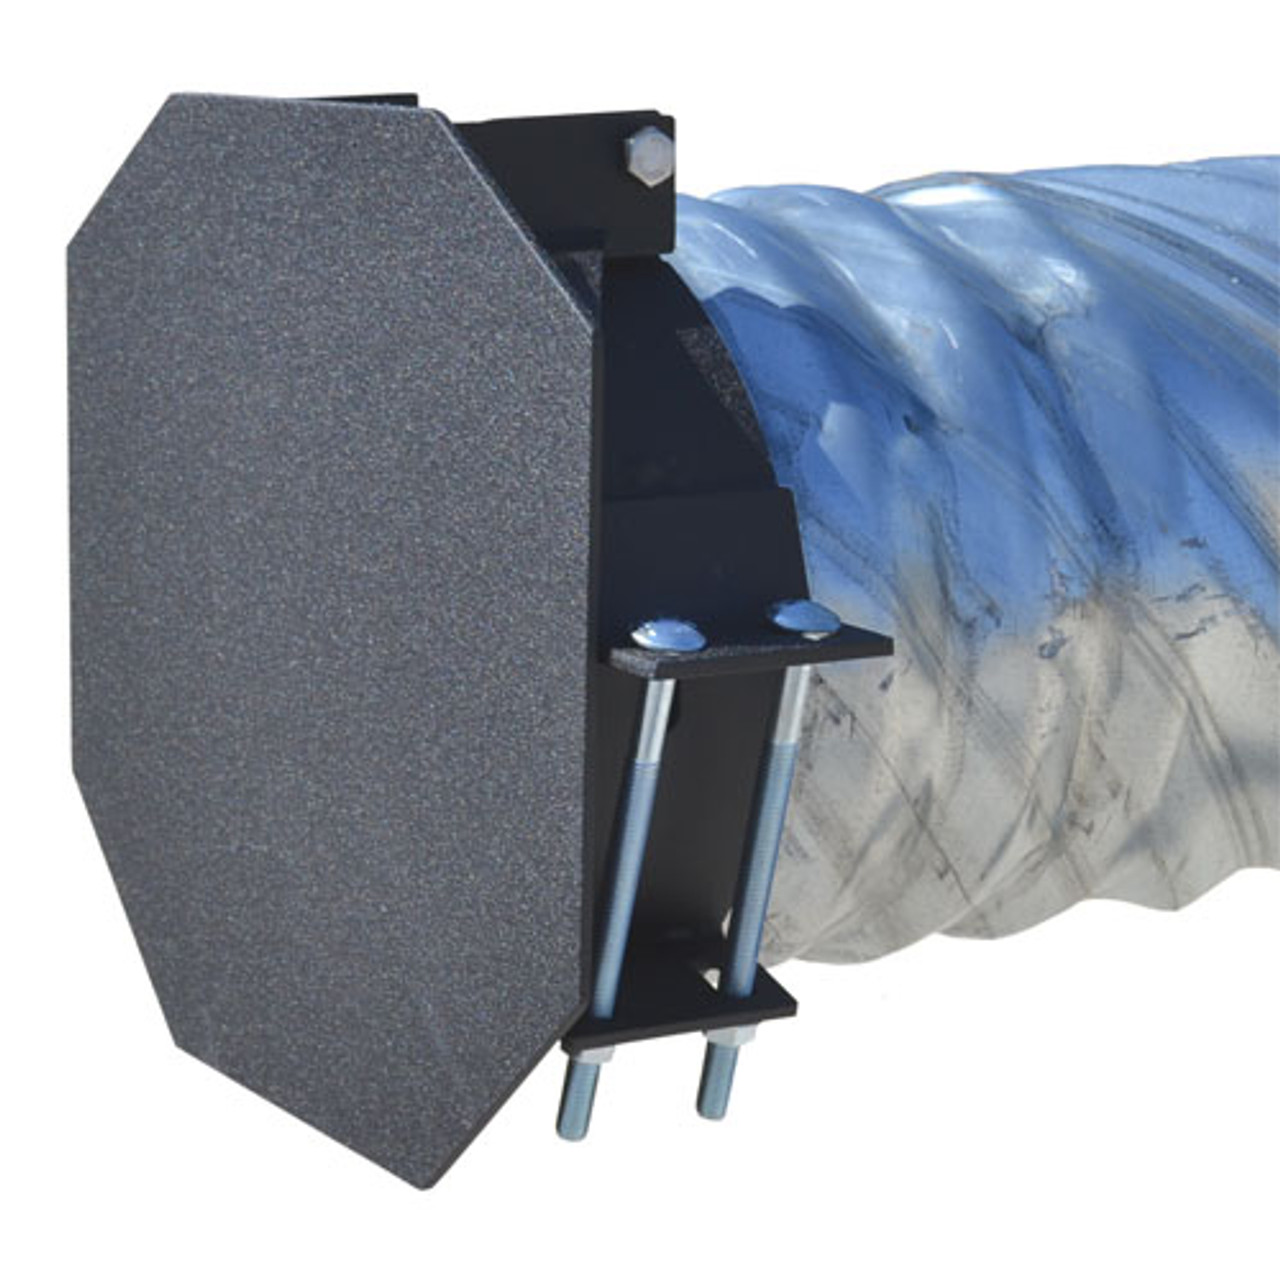 Flap Gate 12" Heavy Duty The Drainage Products Store